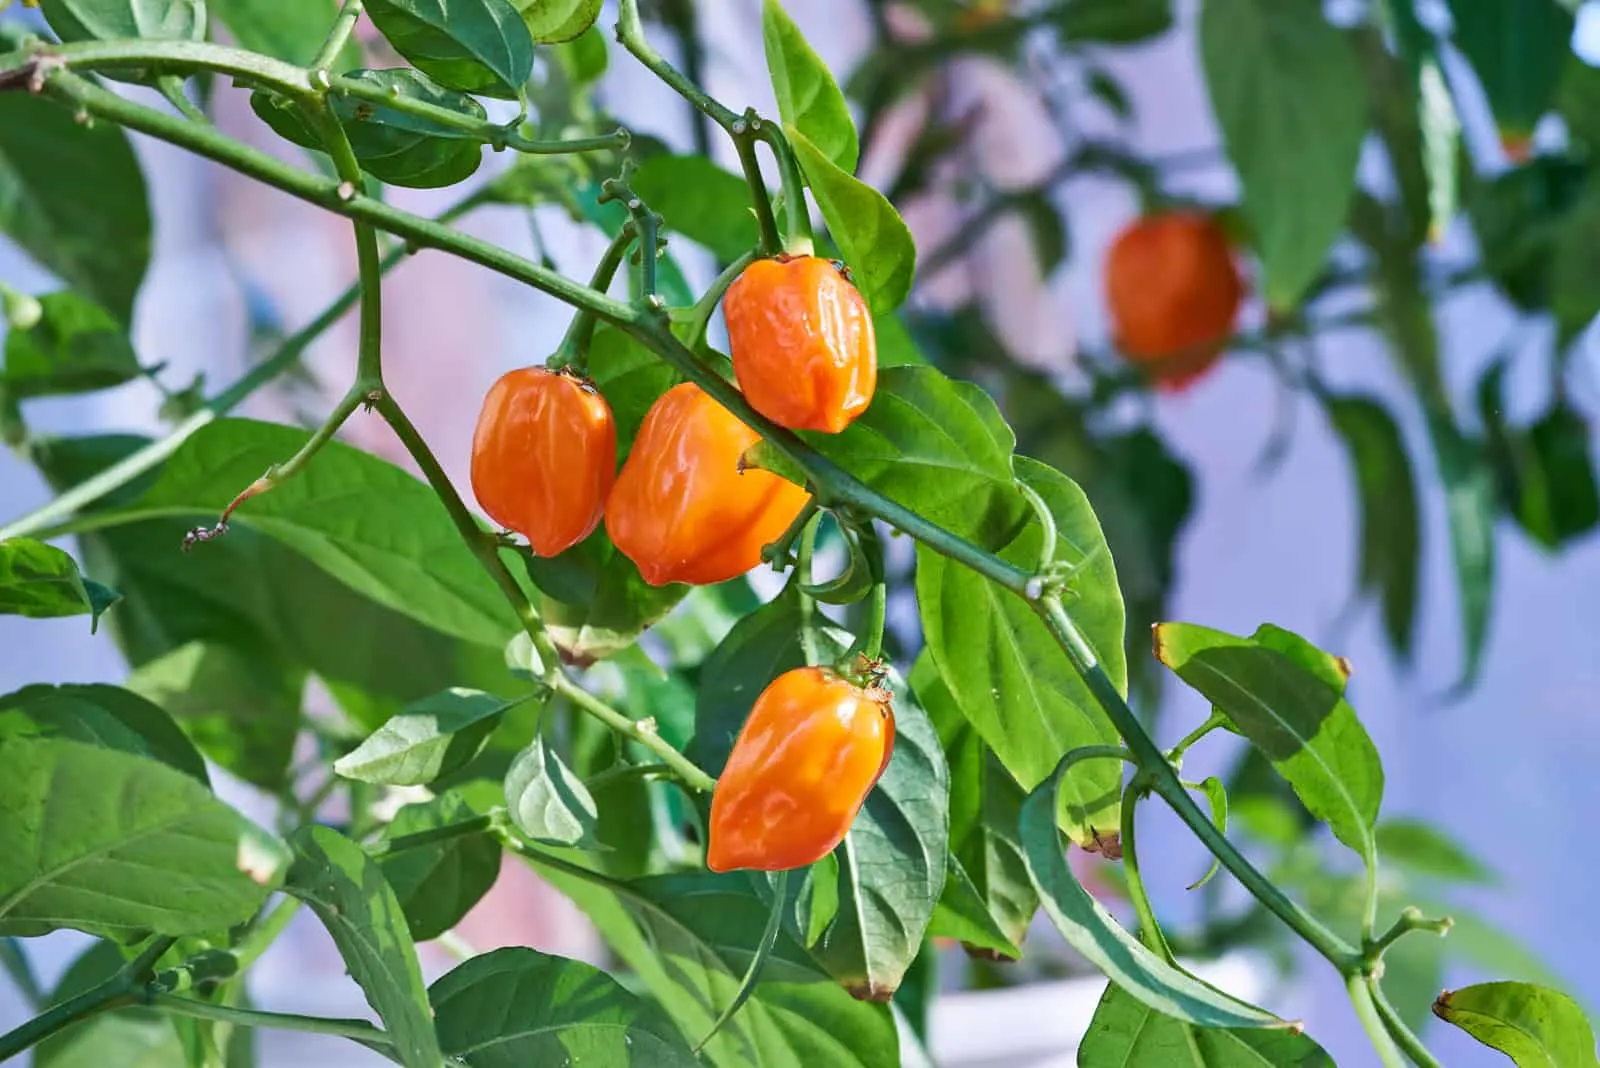 habanero peppers on a plant